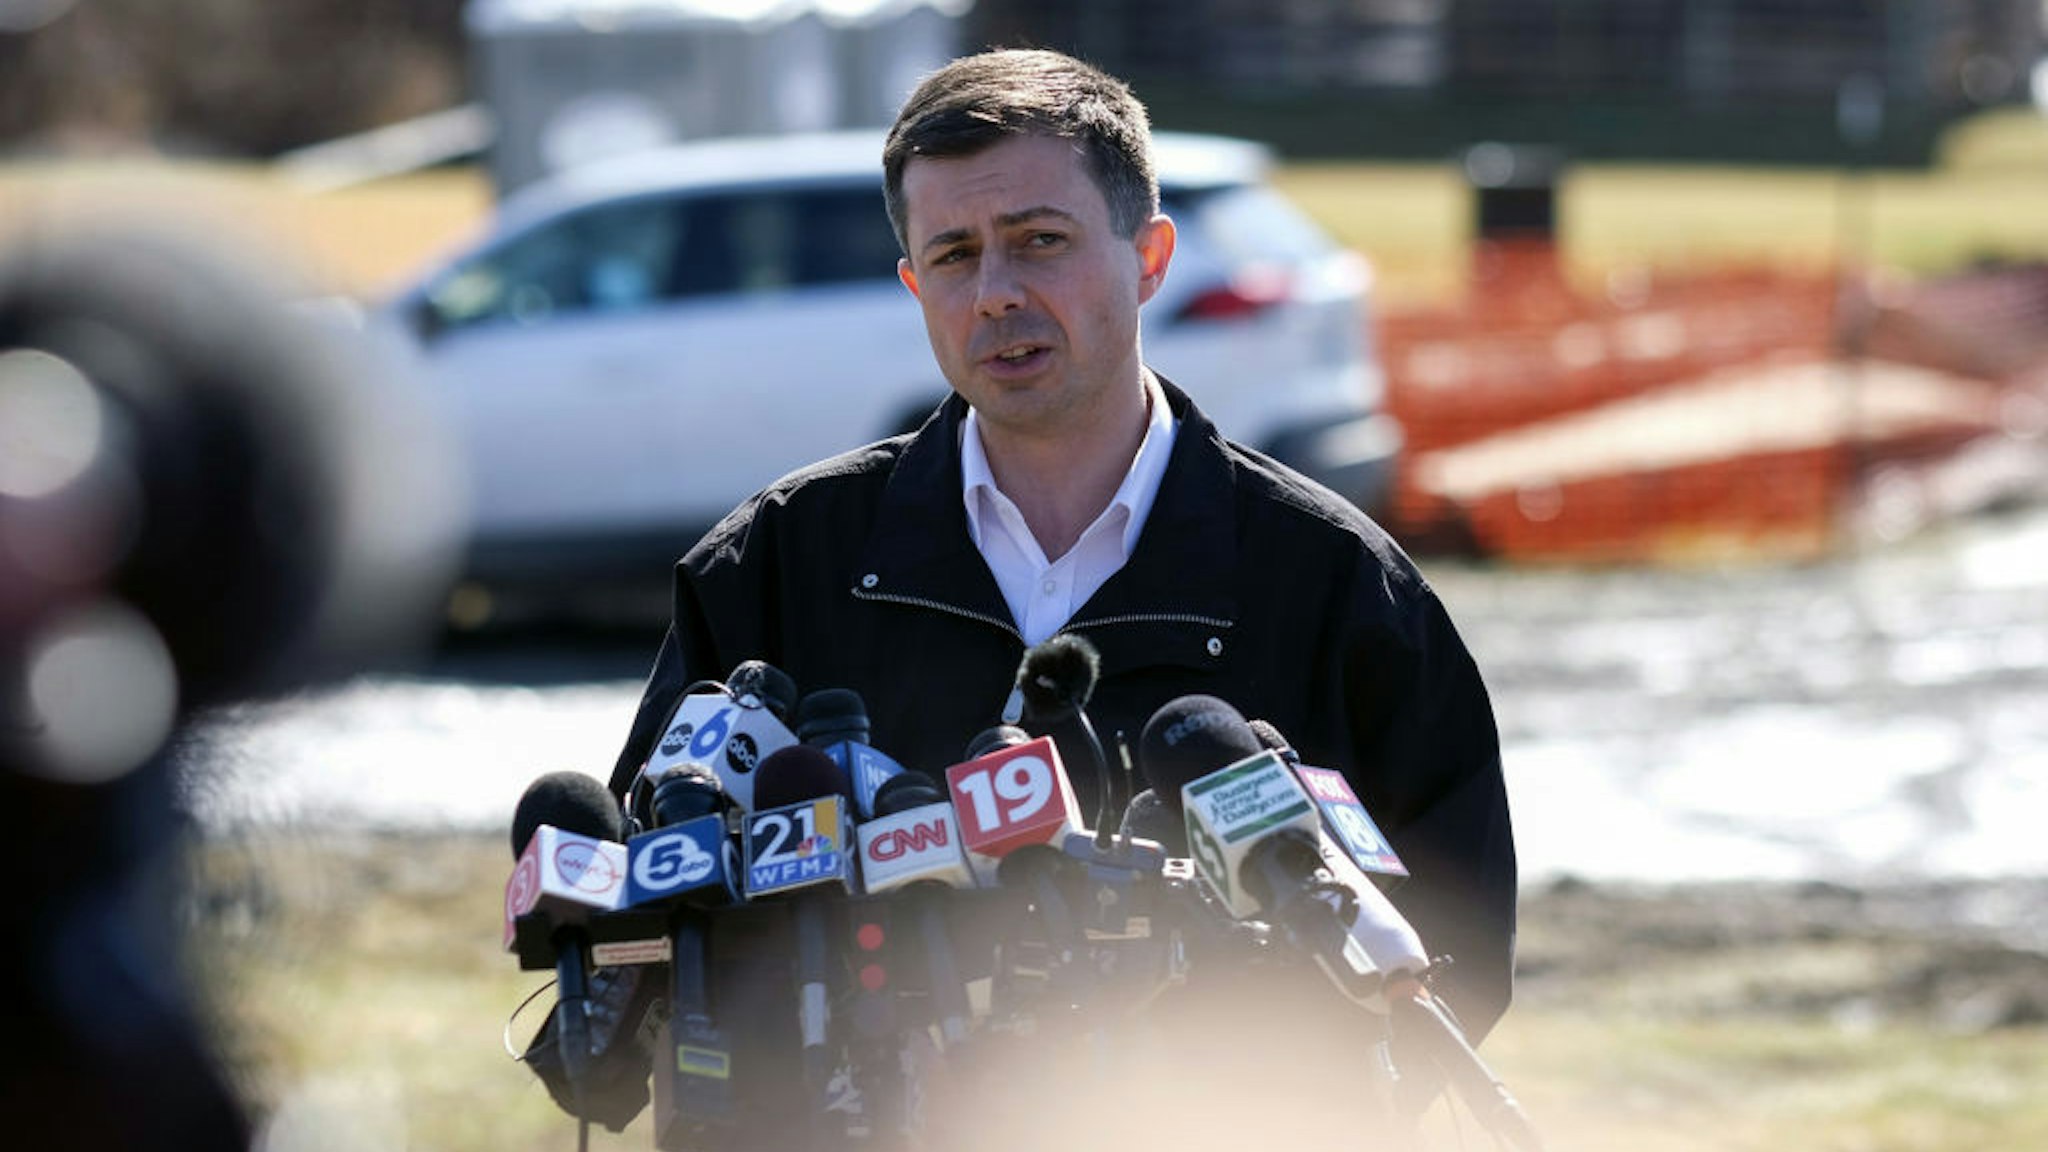 Pete Buttigieg, US transportation secretary, speaks during a news conference near the site of the Norfolk Southern train derailment in East Palestine, Ohio, US, on Thursday, Feb. 23, 2023. Buttigieg traveled to East Palestine, Ohio, on Thursday, as the Biden administration hastens its response to a fiery train crash earlier this month that spread toxic chemicals and has become a flashpoint in the upcoming presidential election. Photographer: Matthew Hatcher/Bloomberg via Getty Images